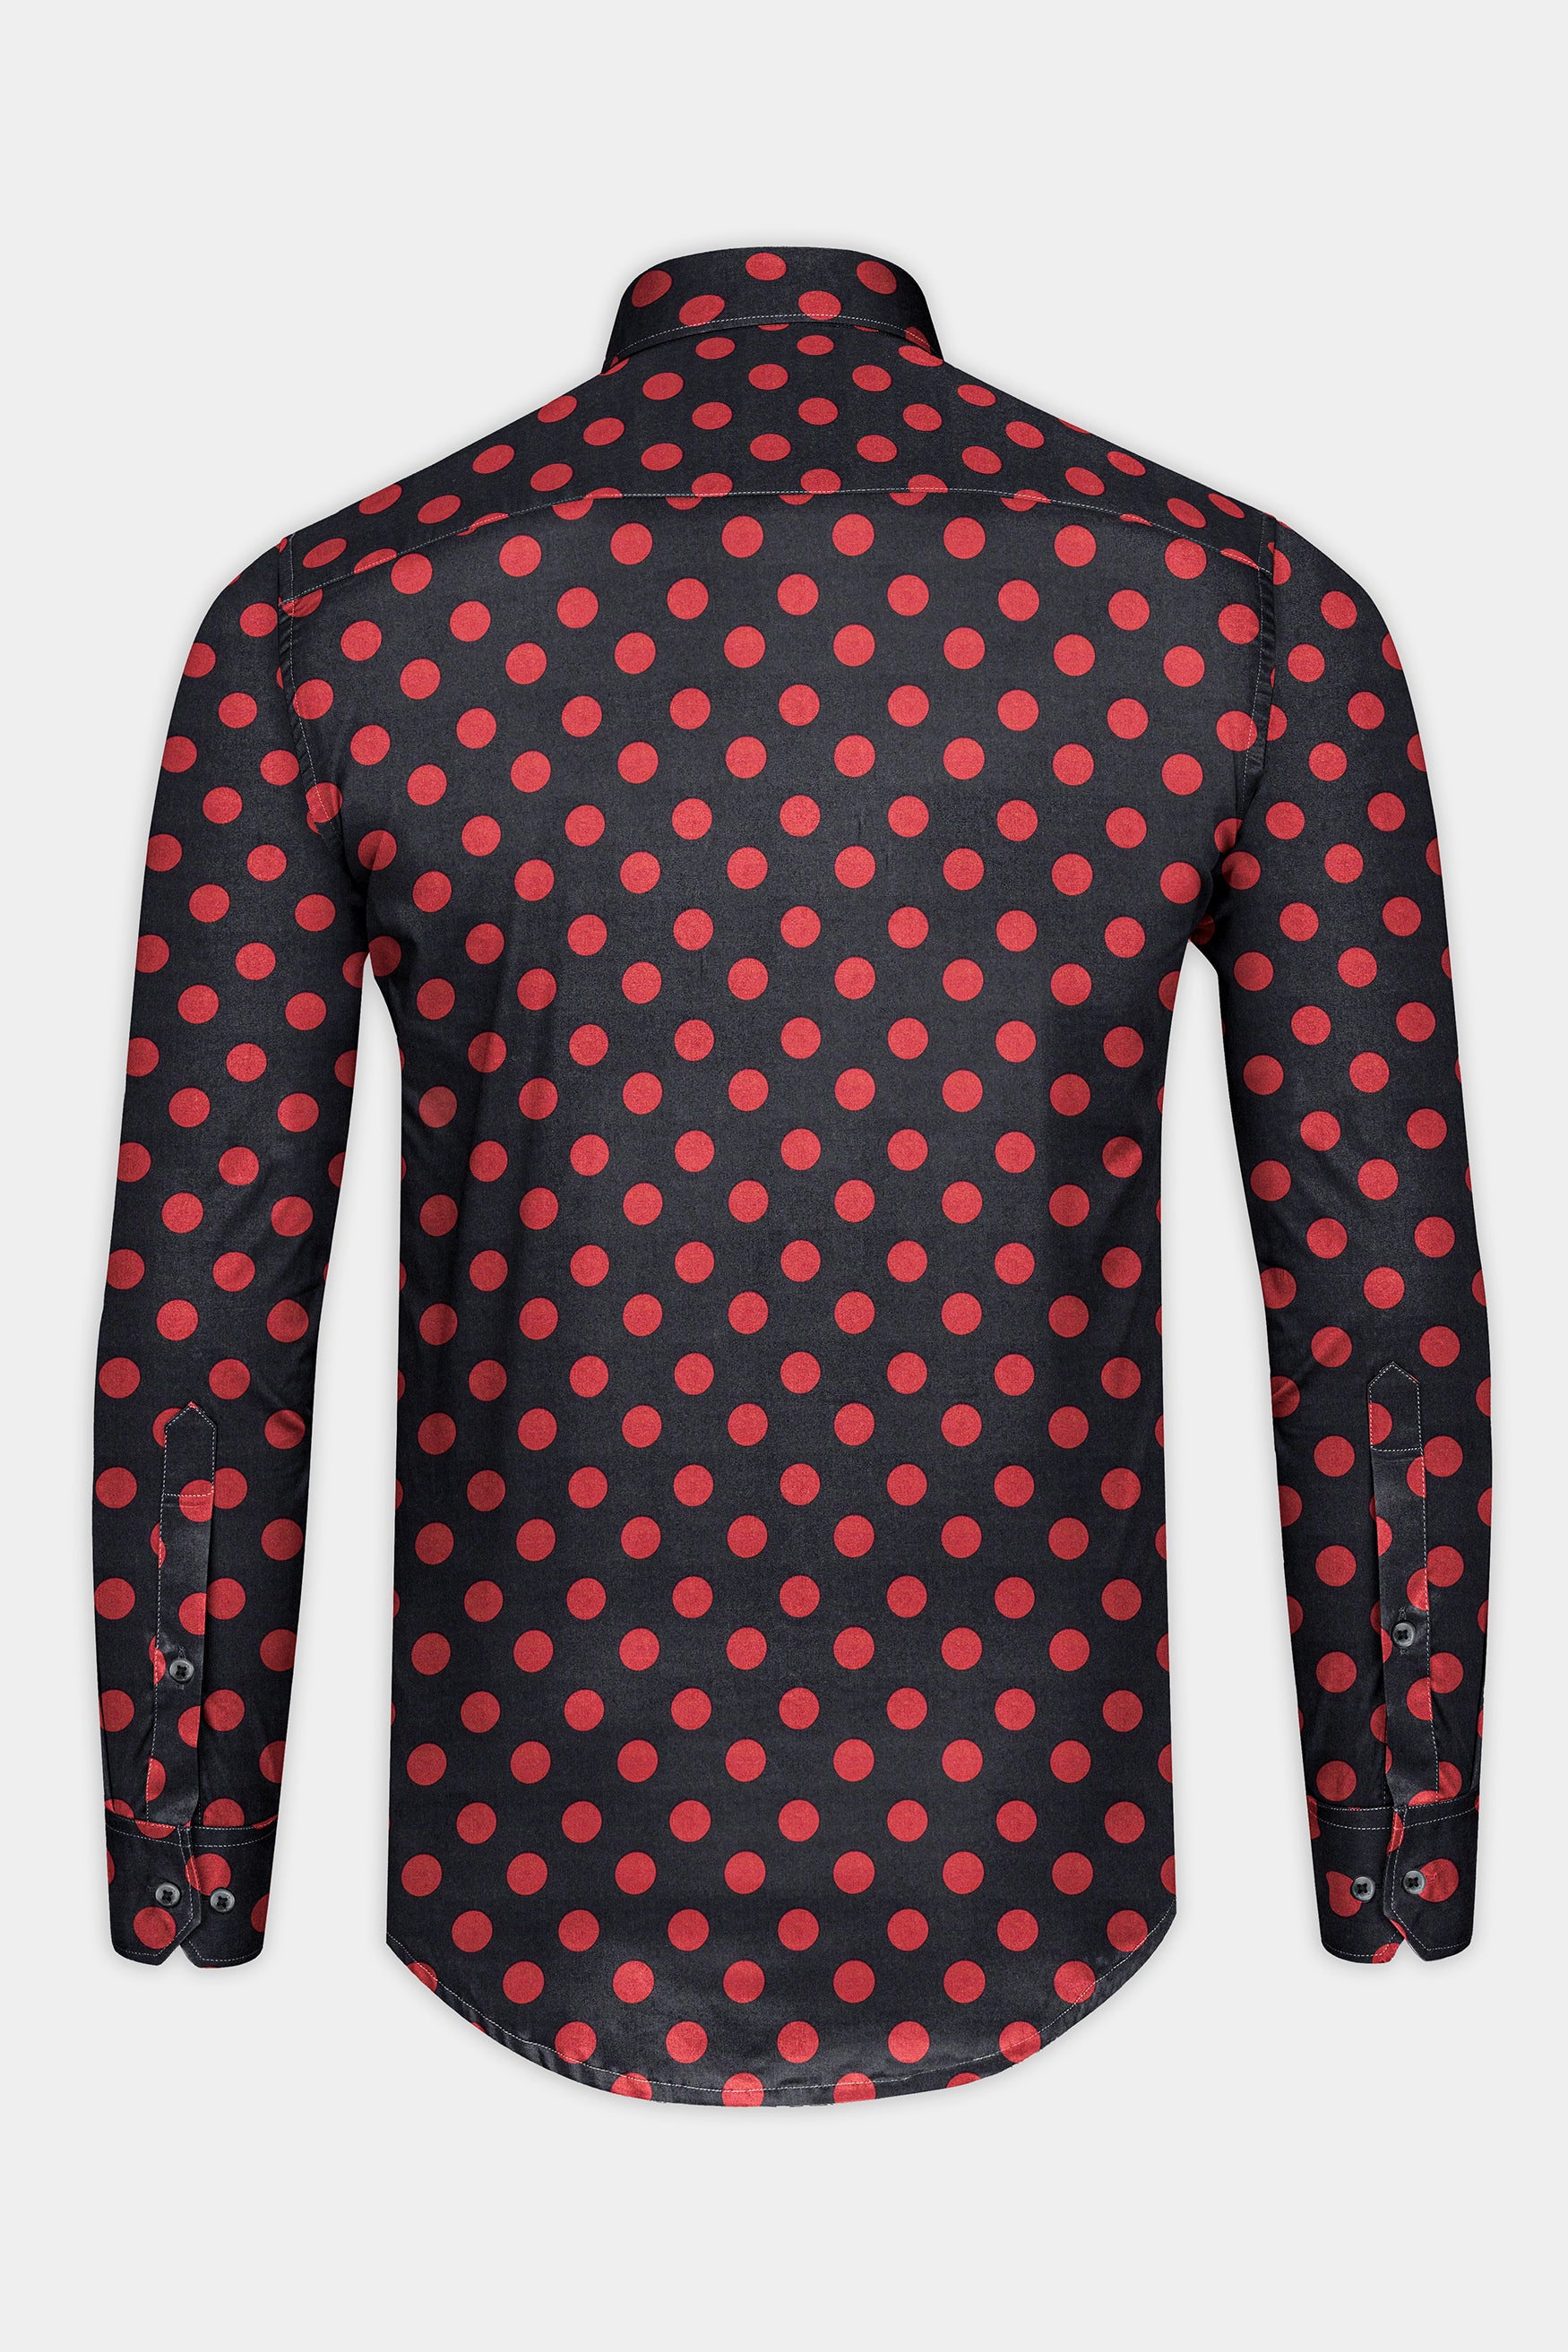 Charcoal Gray and Rose Red Polka Dotted Premium Cotton Shirt